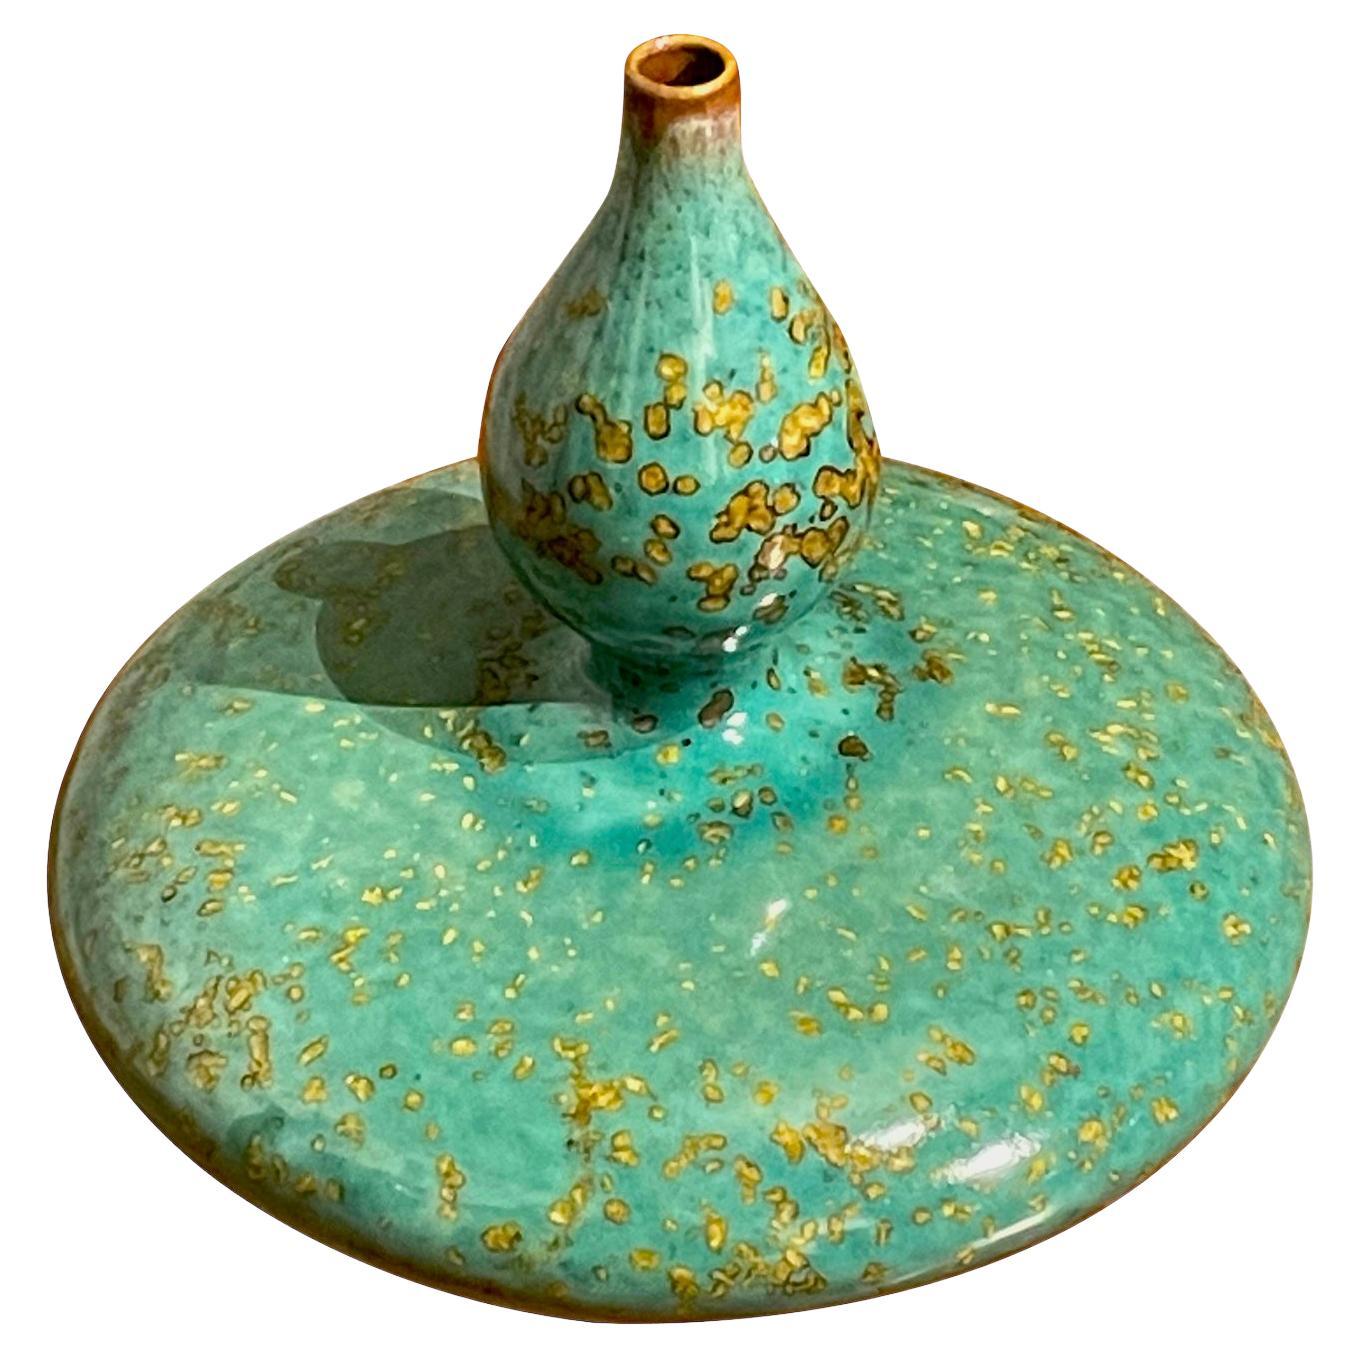 Turquoise with Gold Speckled Glaze Squat Shape Vase, China, Contemporary